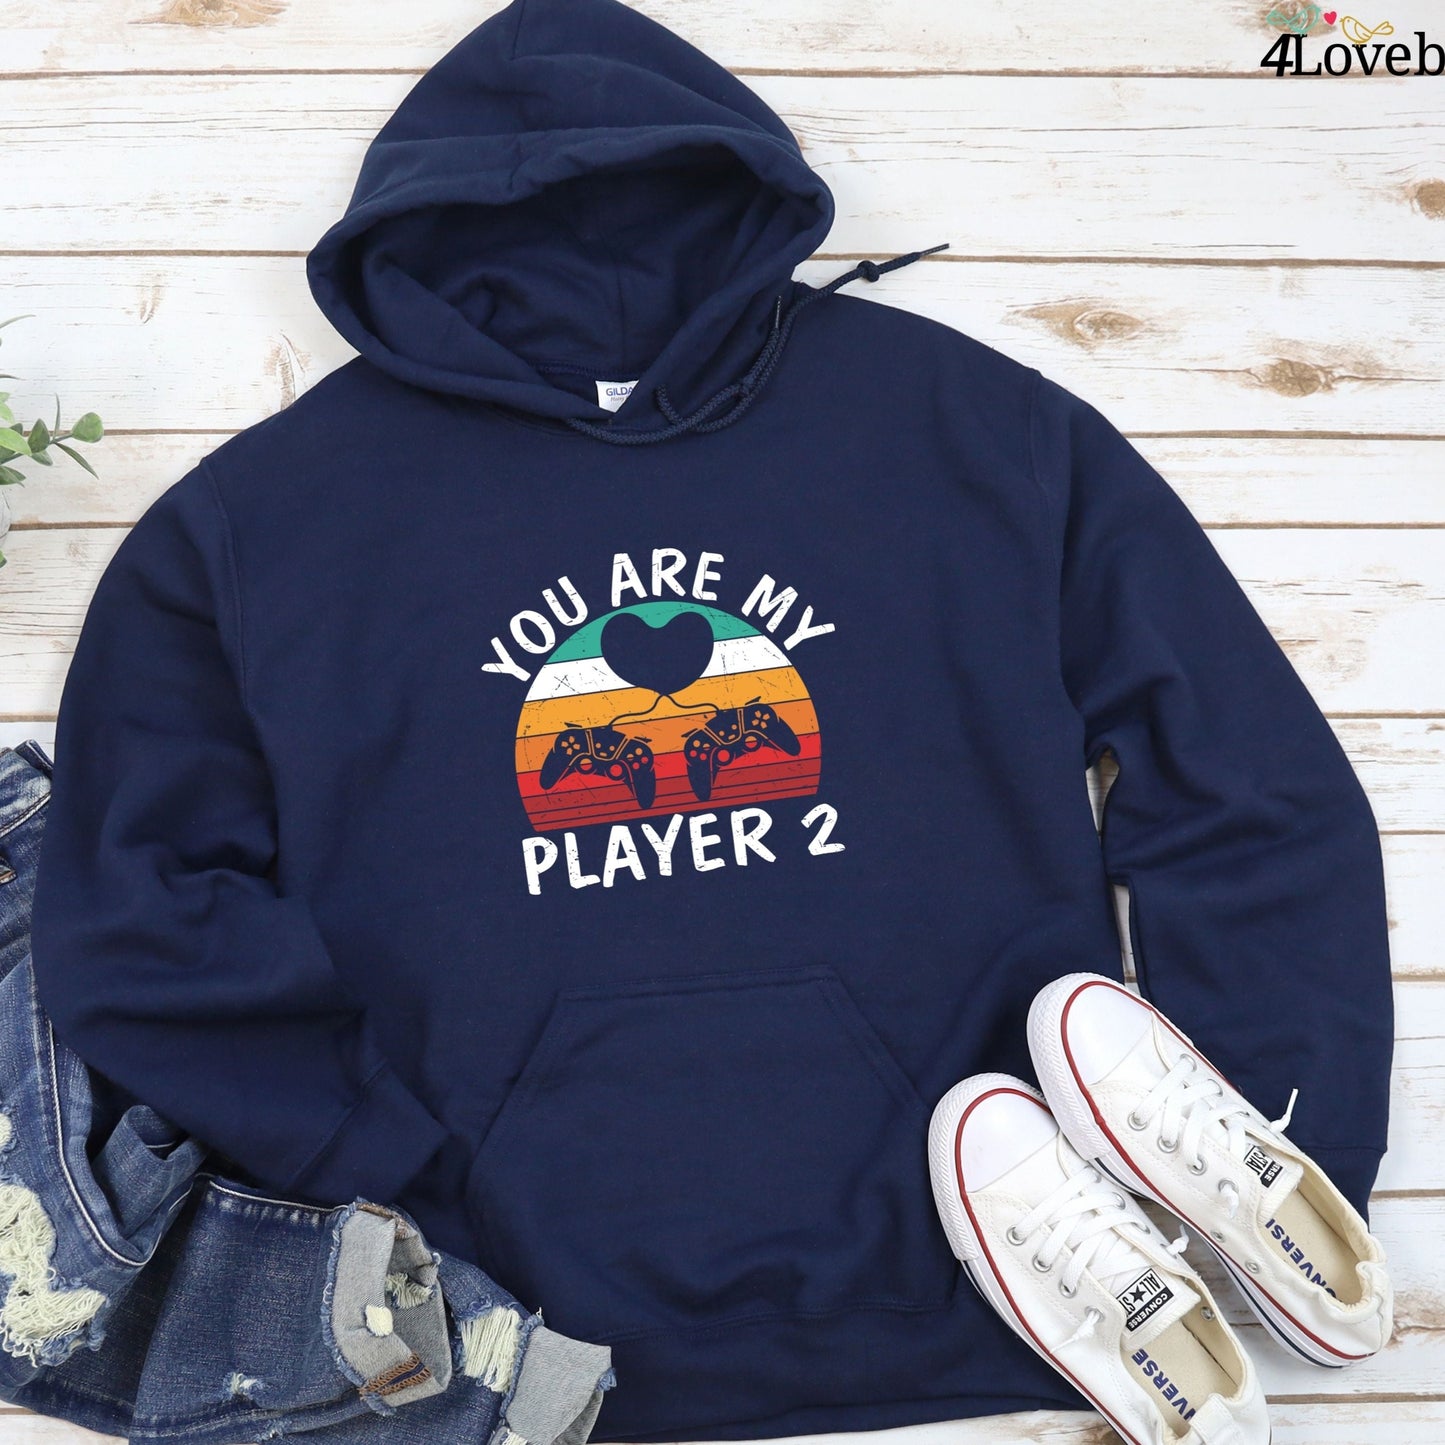 Player 1 and 2 Matching Outfits, Gaming Lovers Set, Geeky Couples Gift, Valentine's Day Matching Set